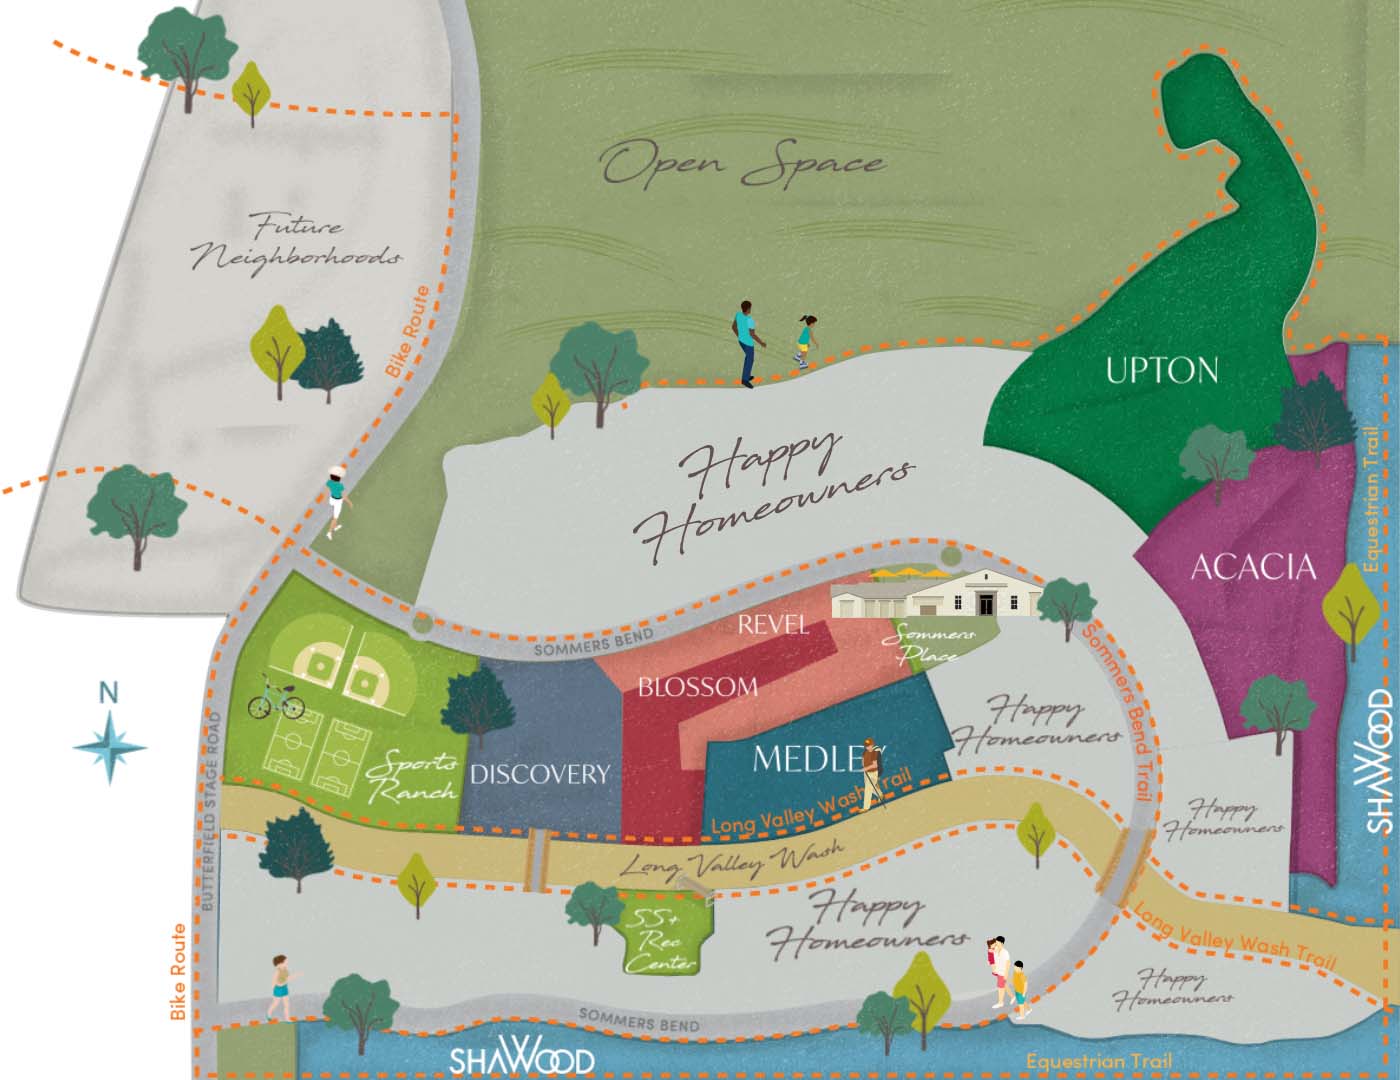 Site Map - Sommers Bend